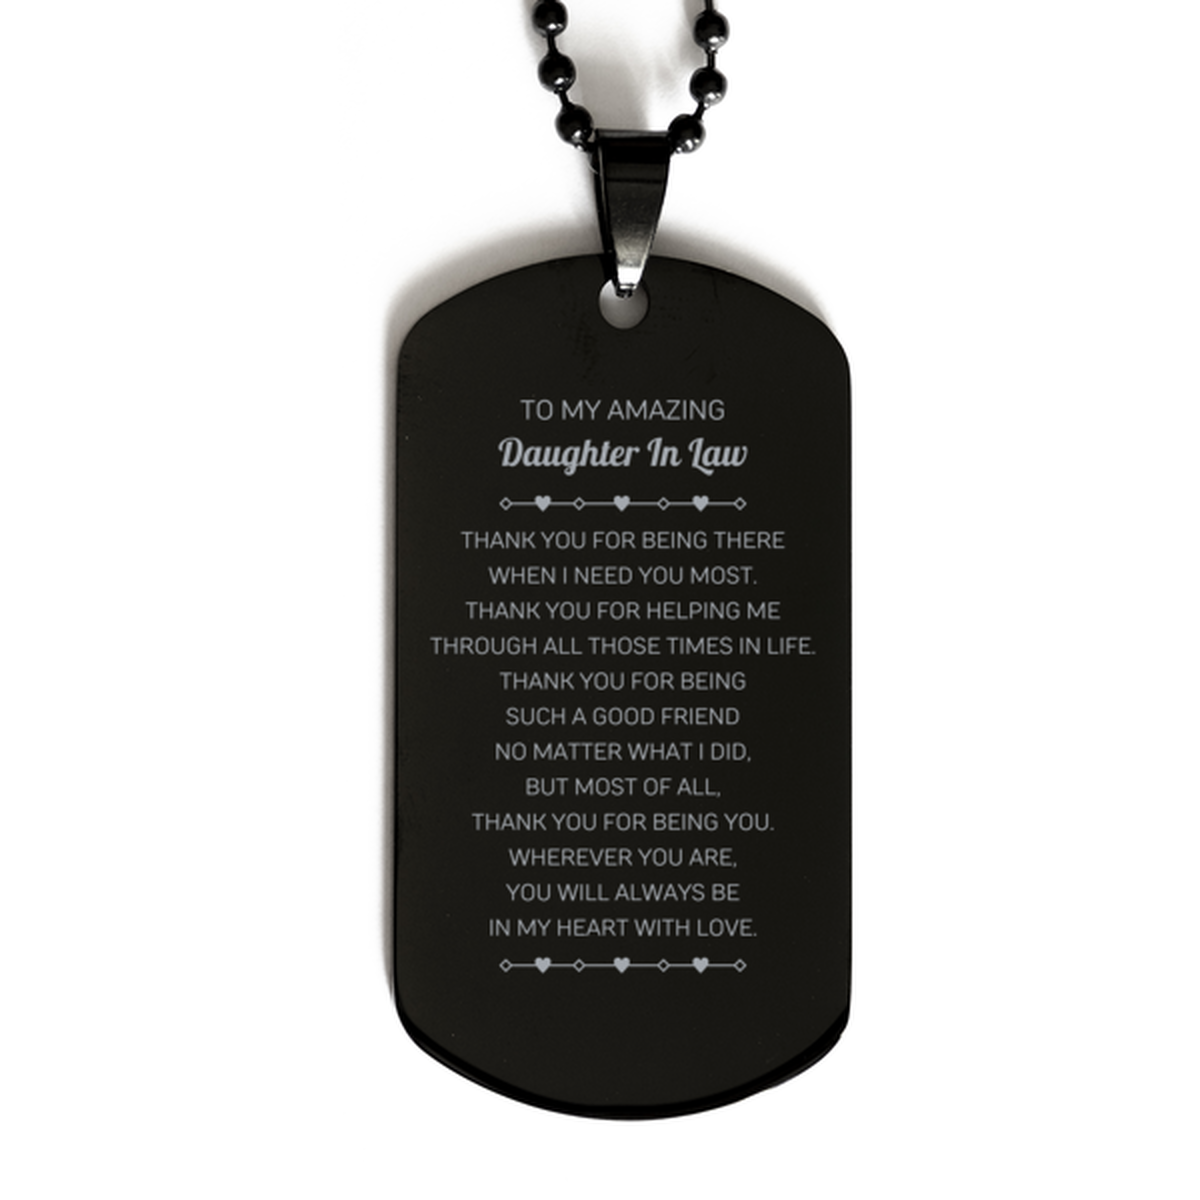 To My Amazing Daughter In Law Black Dog Tag, Thank you for being there, Thank You Gifts For Daughter In Law, Birthday, Christmas Unique Gifts For Daughter In Law